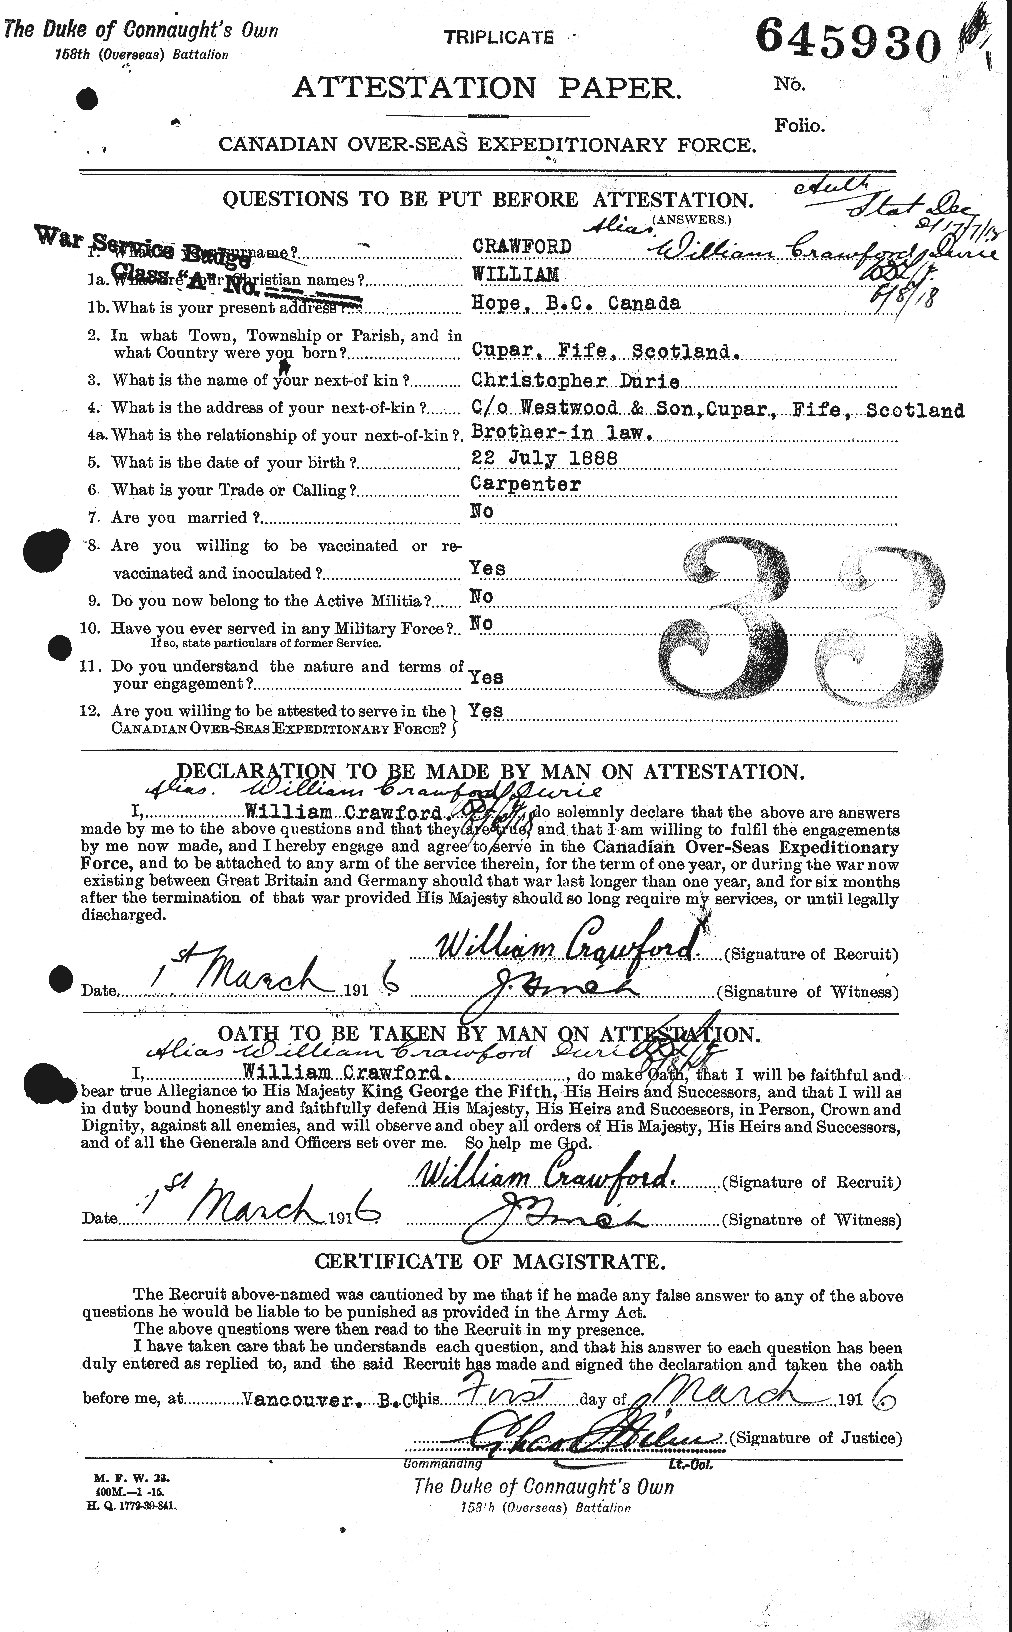 Personnel Records of the First World War - CEF 305192a